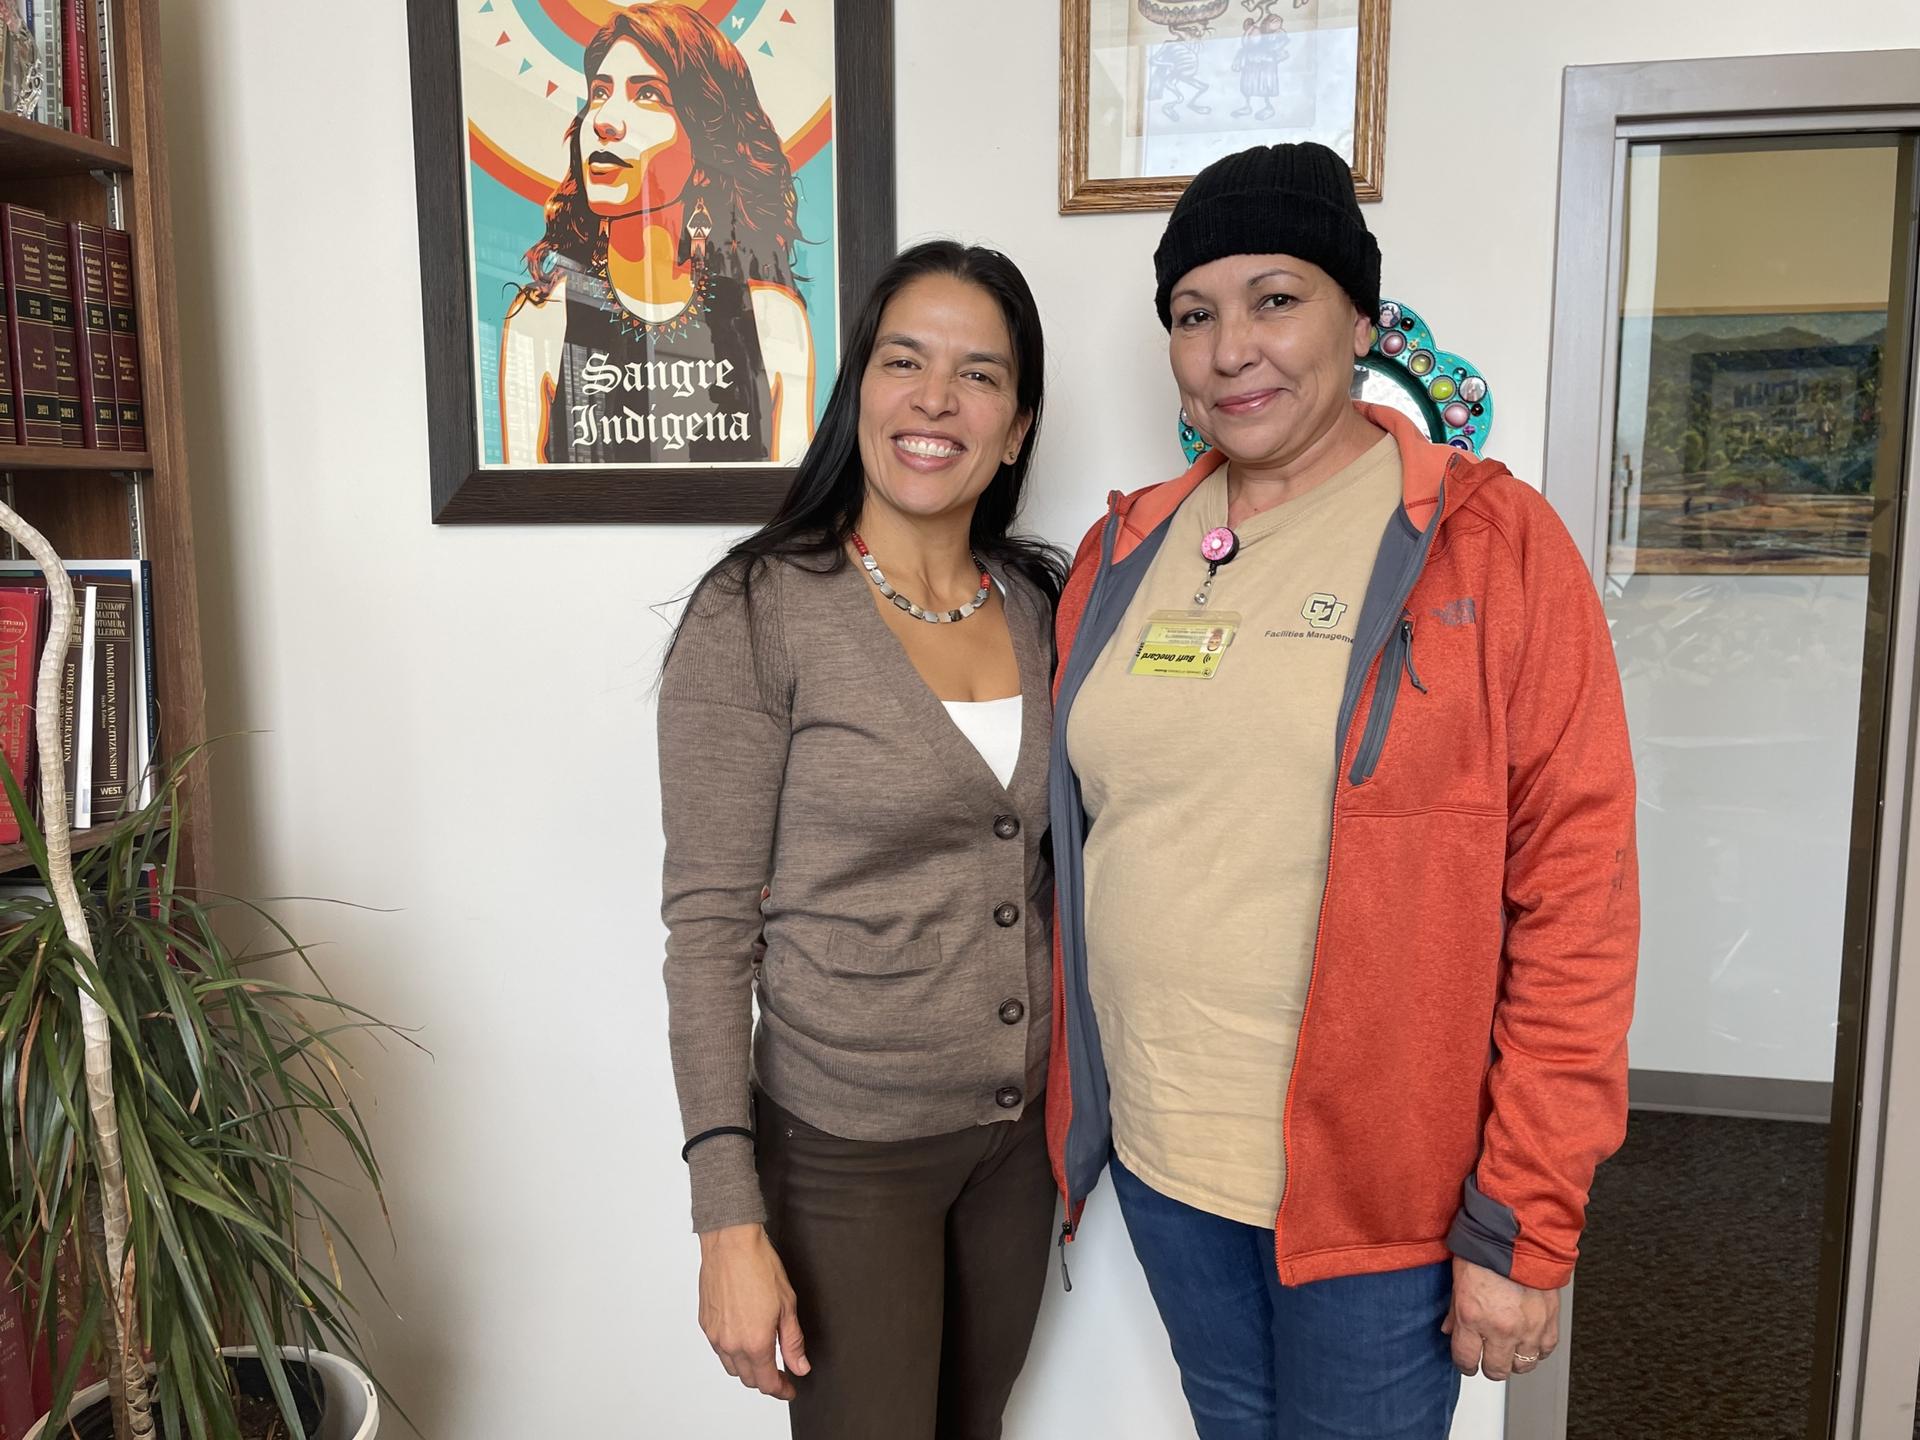 Violeta Chapin, University of Colorado law school professor and director of the Immigration Defense Clinic, helped university employee Irma Bernard become a naturalized US citizen.